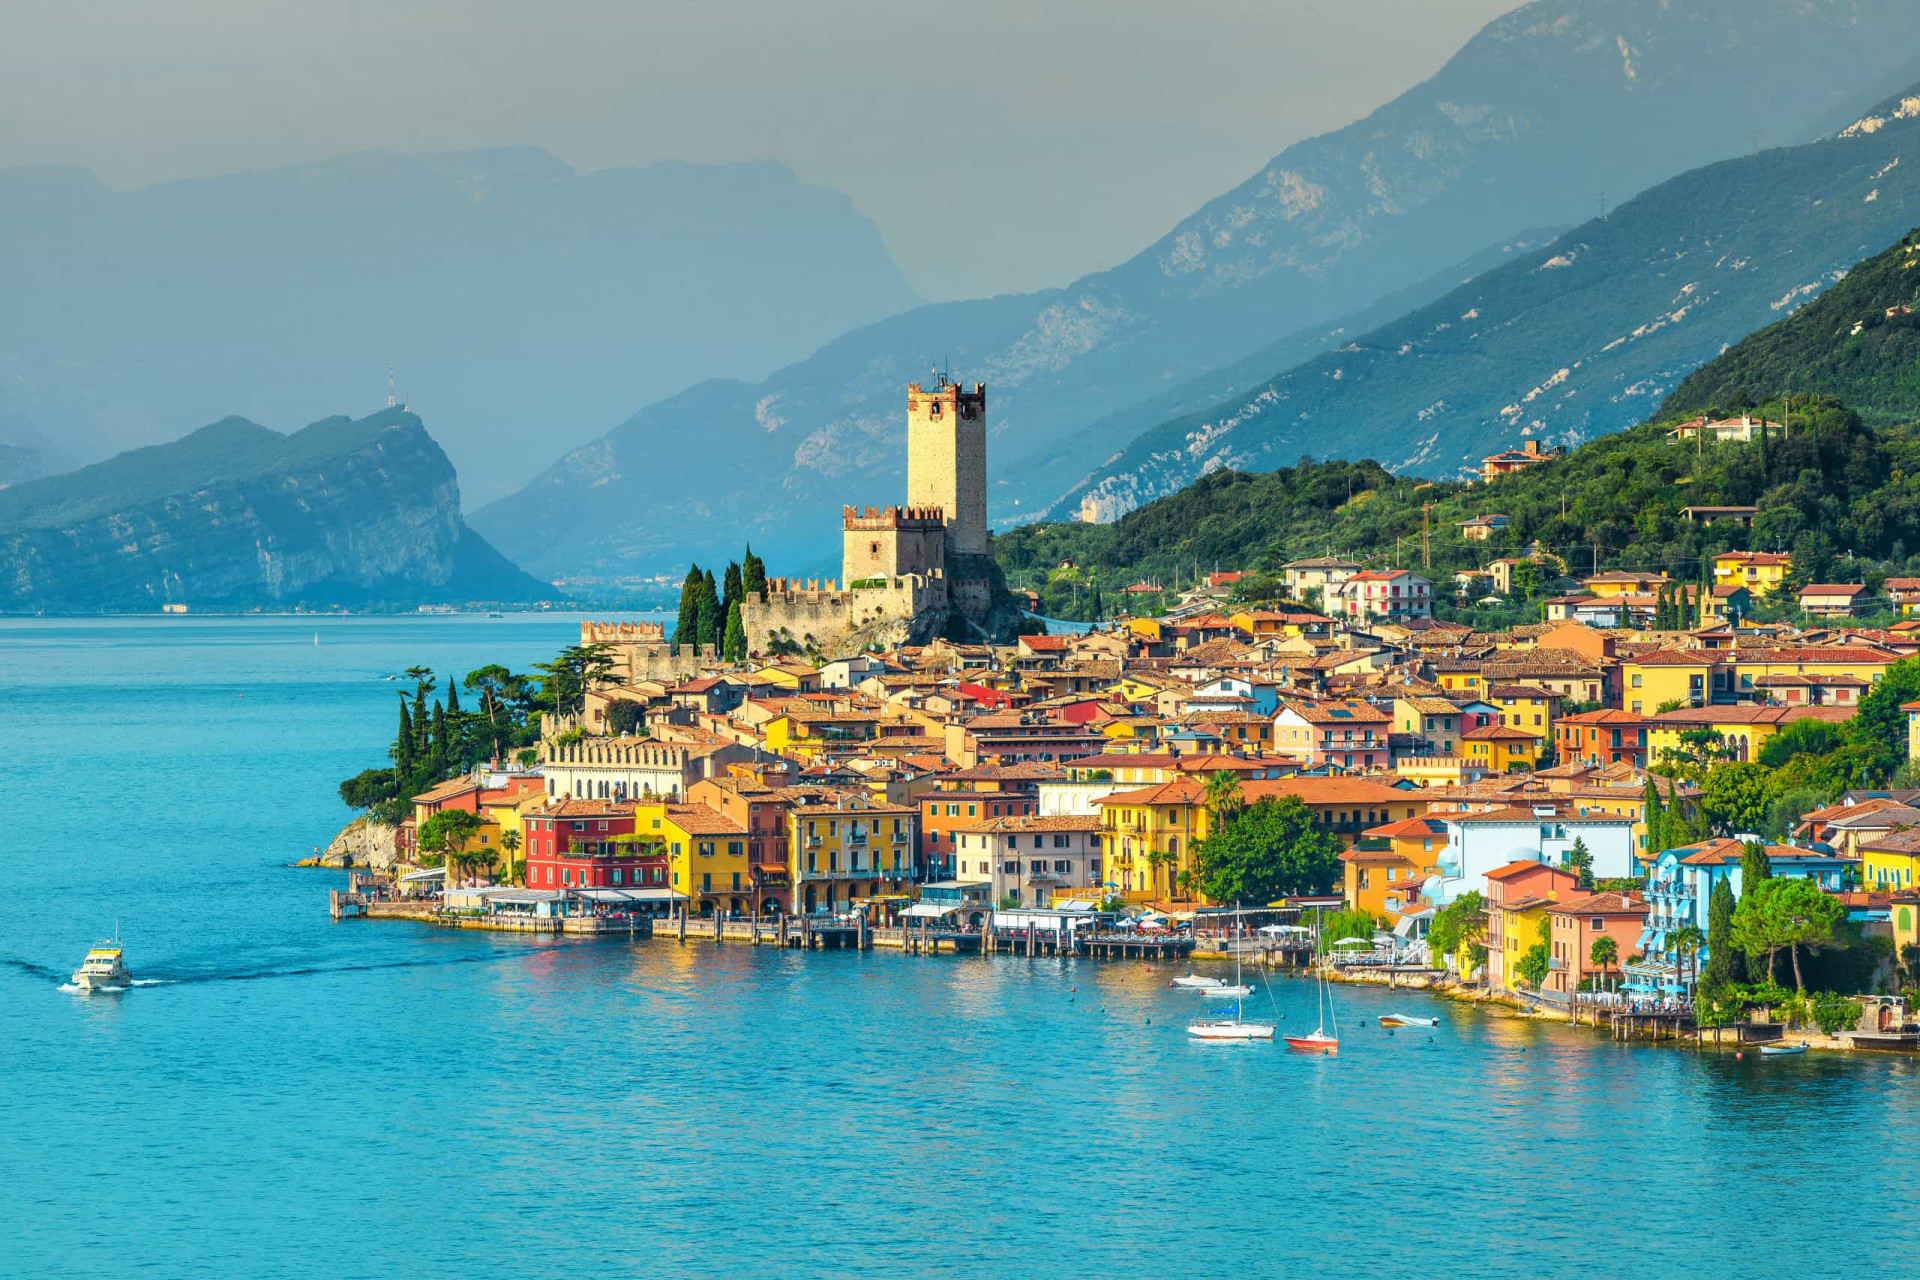 <p>Malcesine snuggles the eastern shore of Lake Garda in the province of Verona. Its most prominent landmark, Castello Scaligero, is built on 13th-century foundations, though the tower dates to an older medieval period.</p><p>You may also like:<a href="https://www.starsinsider.com/n/388942?utm_source=msn.com&utm_medium=display&utm_campaign=referral_description&utm_content=481361v4en-en_selected"> Real-life heroes: celebrities who've saved lives</a></p>